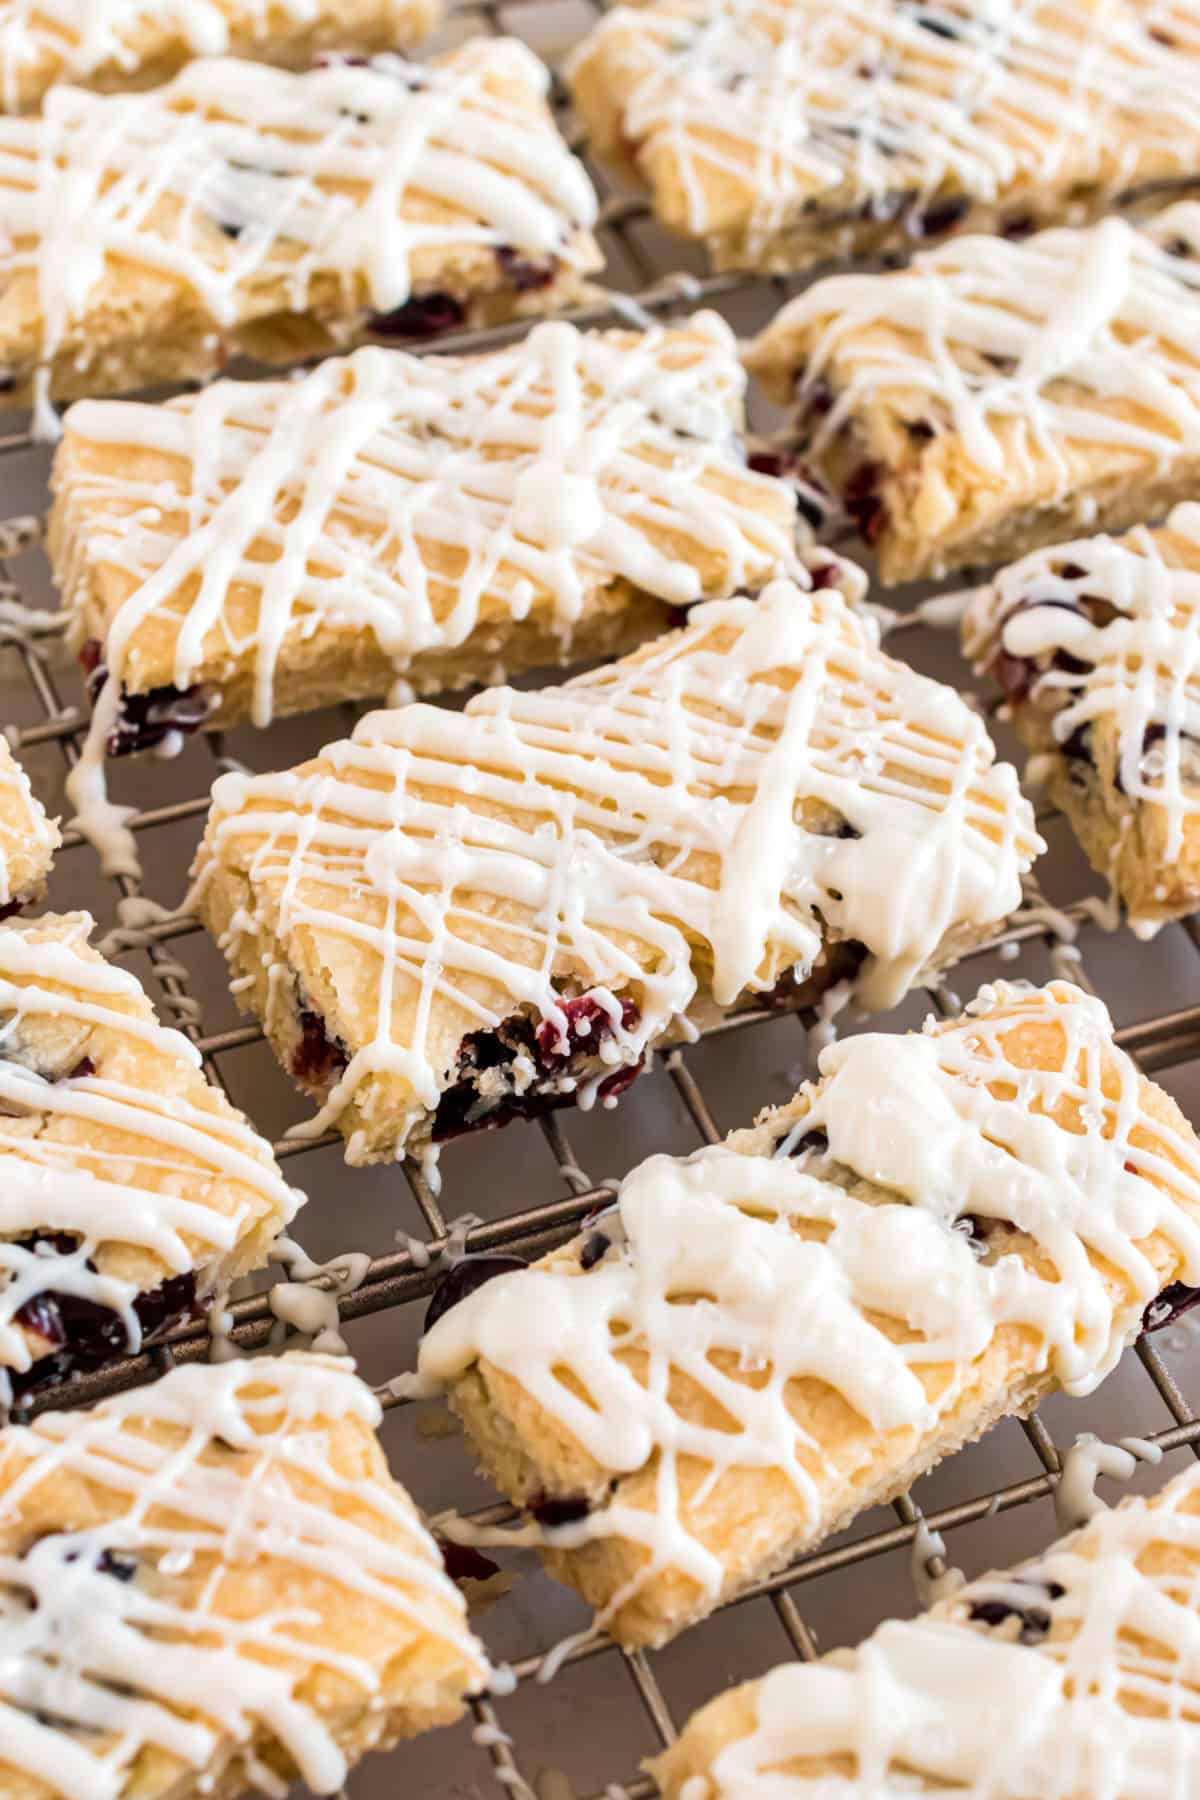 Cranberry white chocolate cookies cut into bars on a wire cooking rack.